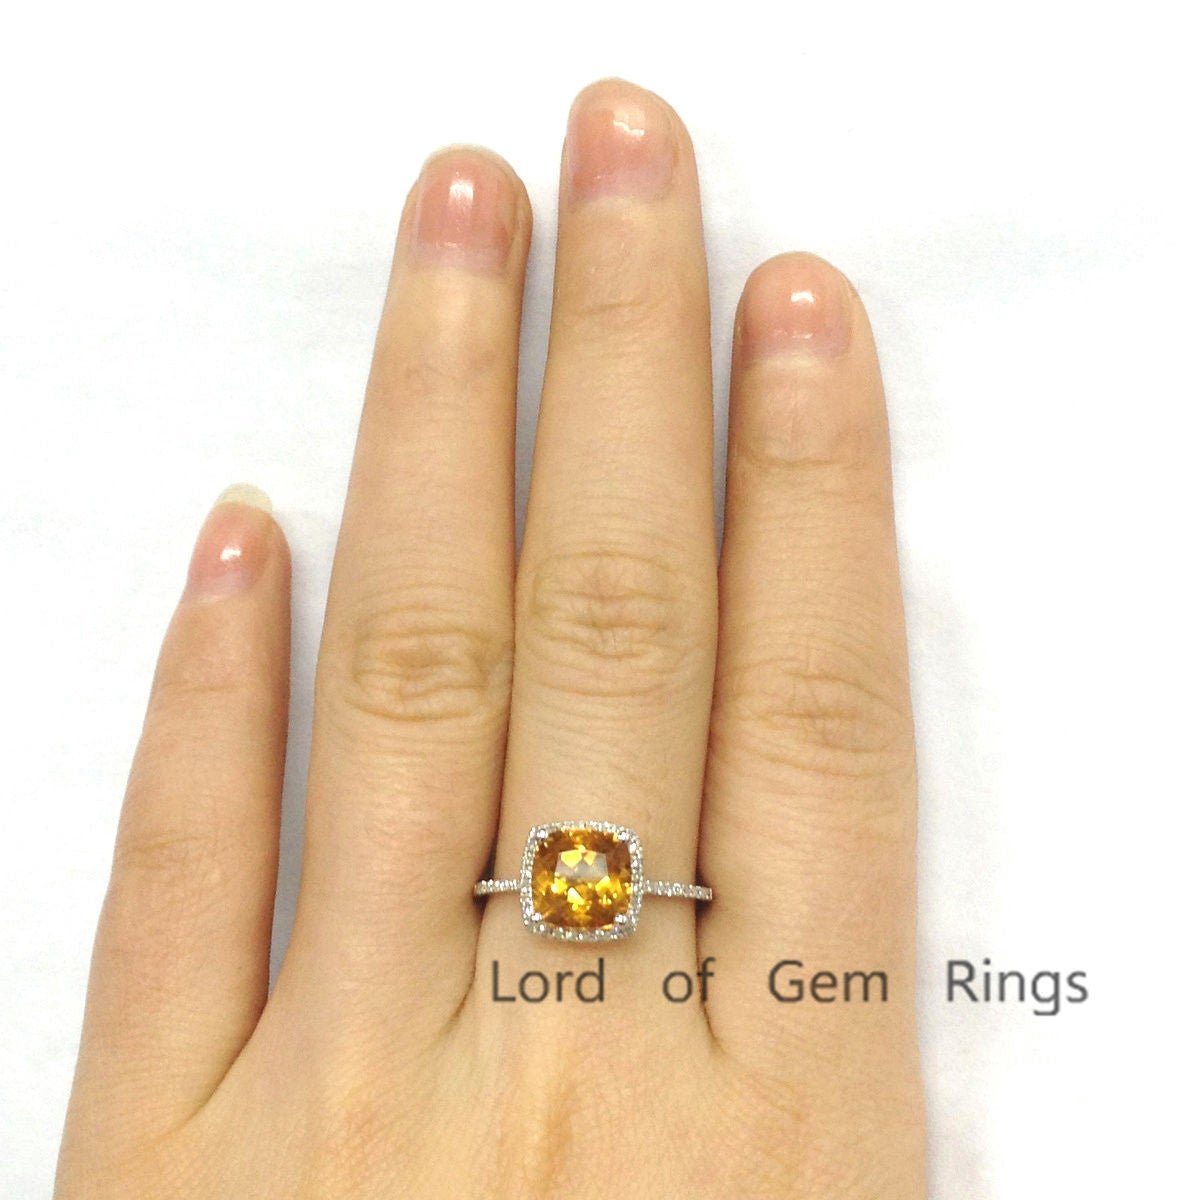 Cushion Yellow Citrine Halo Ring with Diamond Accents - Lord of Gem Rings